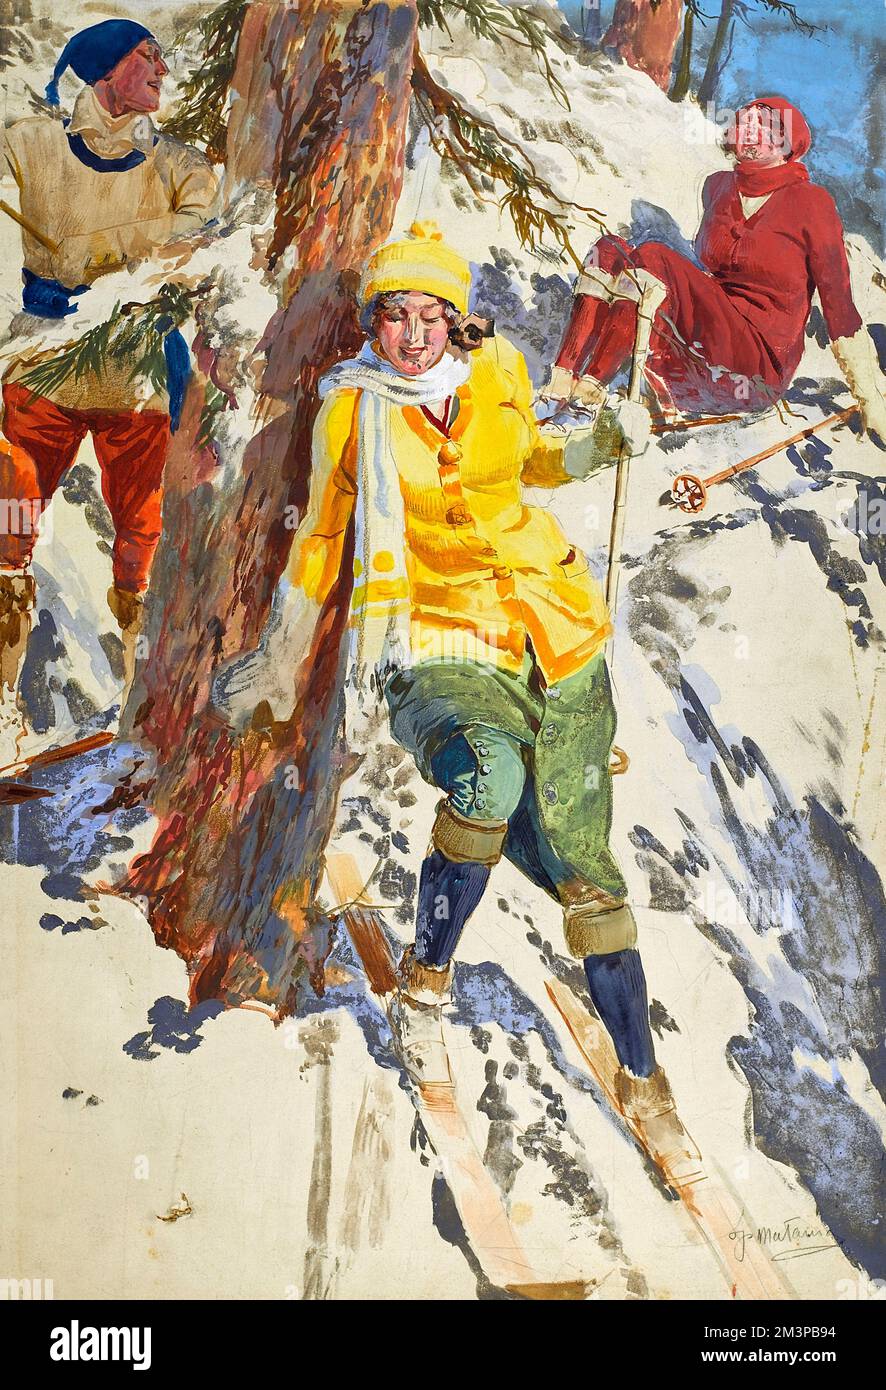 Two women and a man in skiing outfits on a slope, taking a short cut back to St Moritz, Switzerland.      Date: 1914 Stock Photo